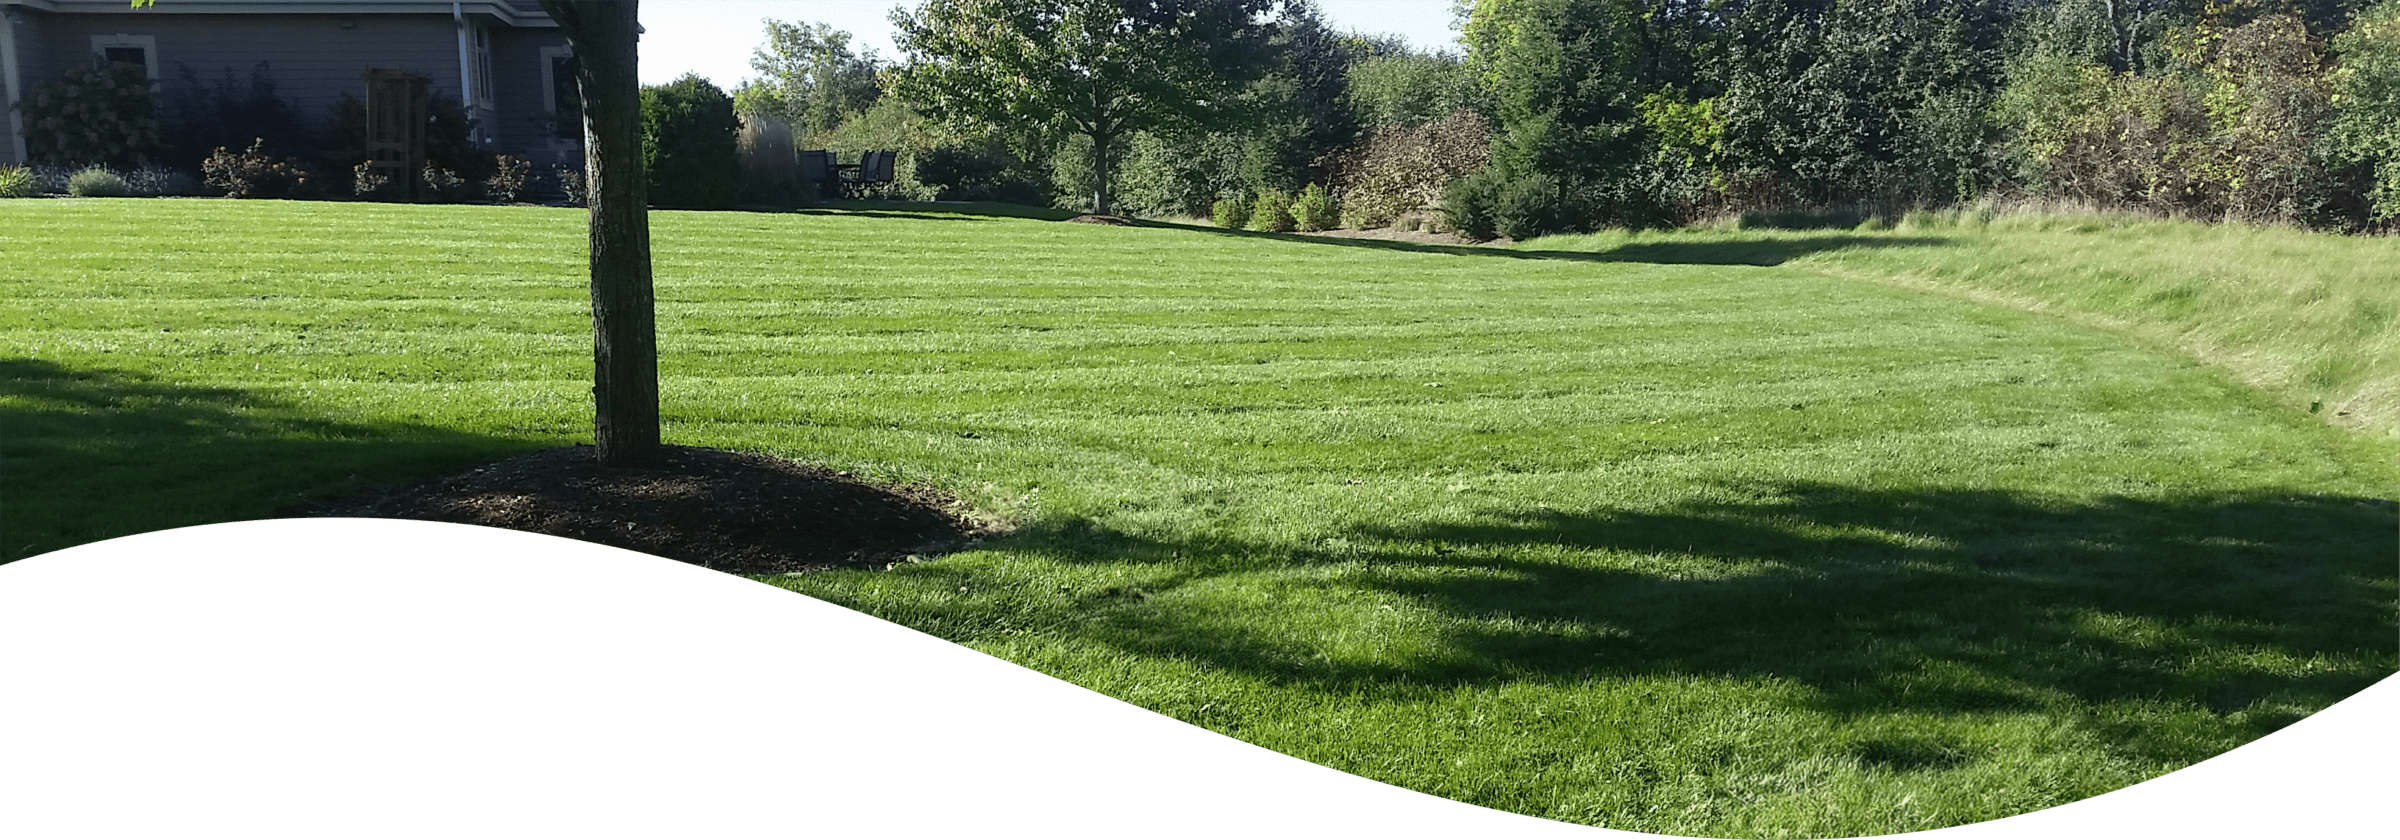 This image shows a neatly mowed lawn with a pattern of stripes, a young tree in mulch, patio furniture in the distance, and surrounding trees.